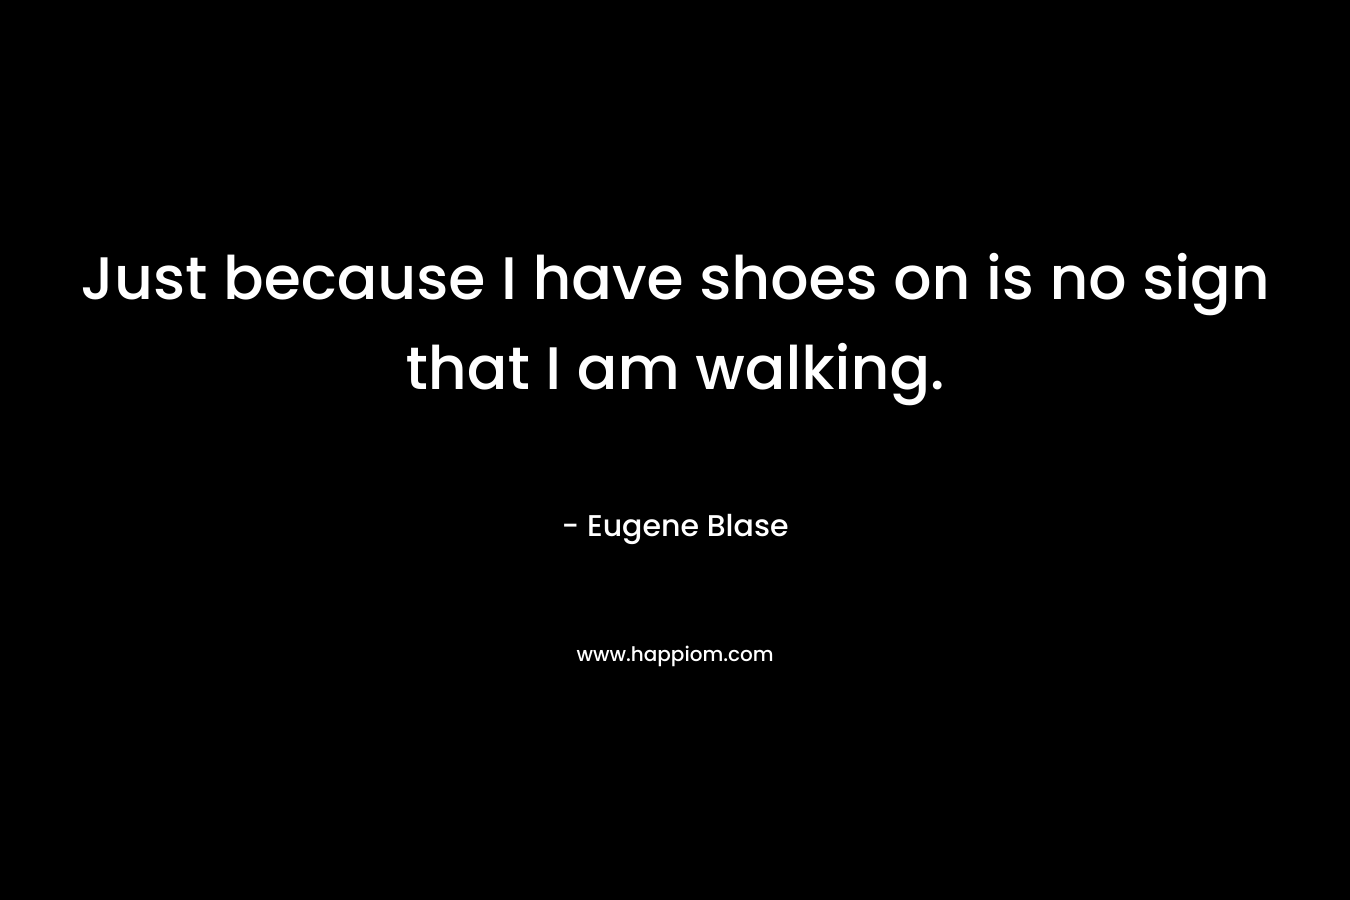 Just because I have shoes on is no sign that I am walking. – Eugene Blase